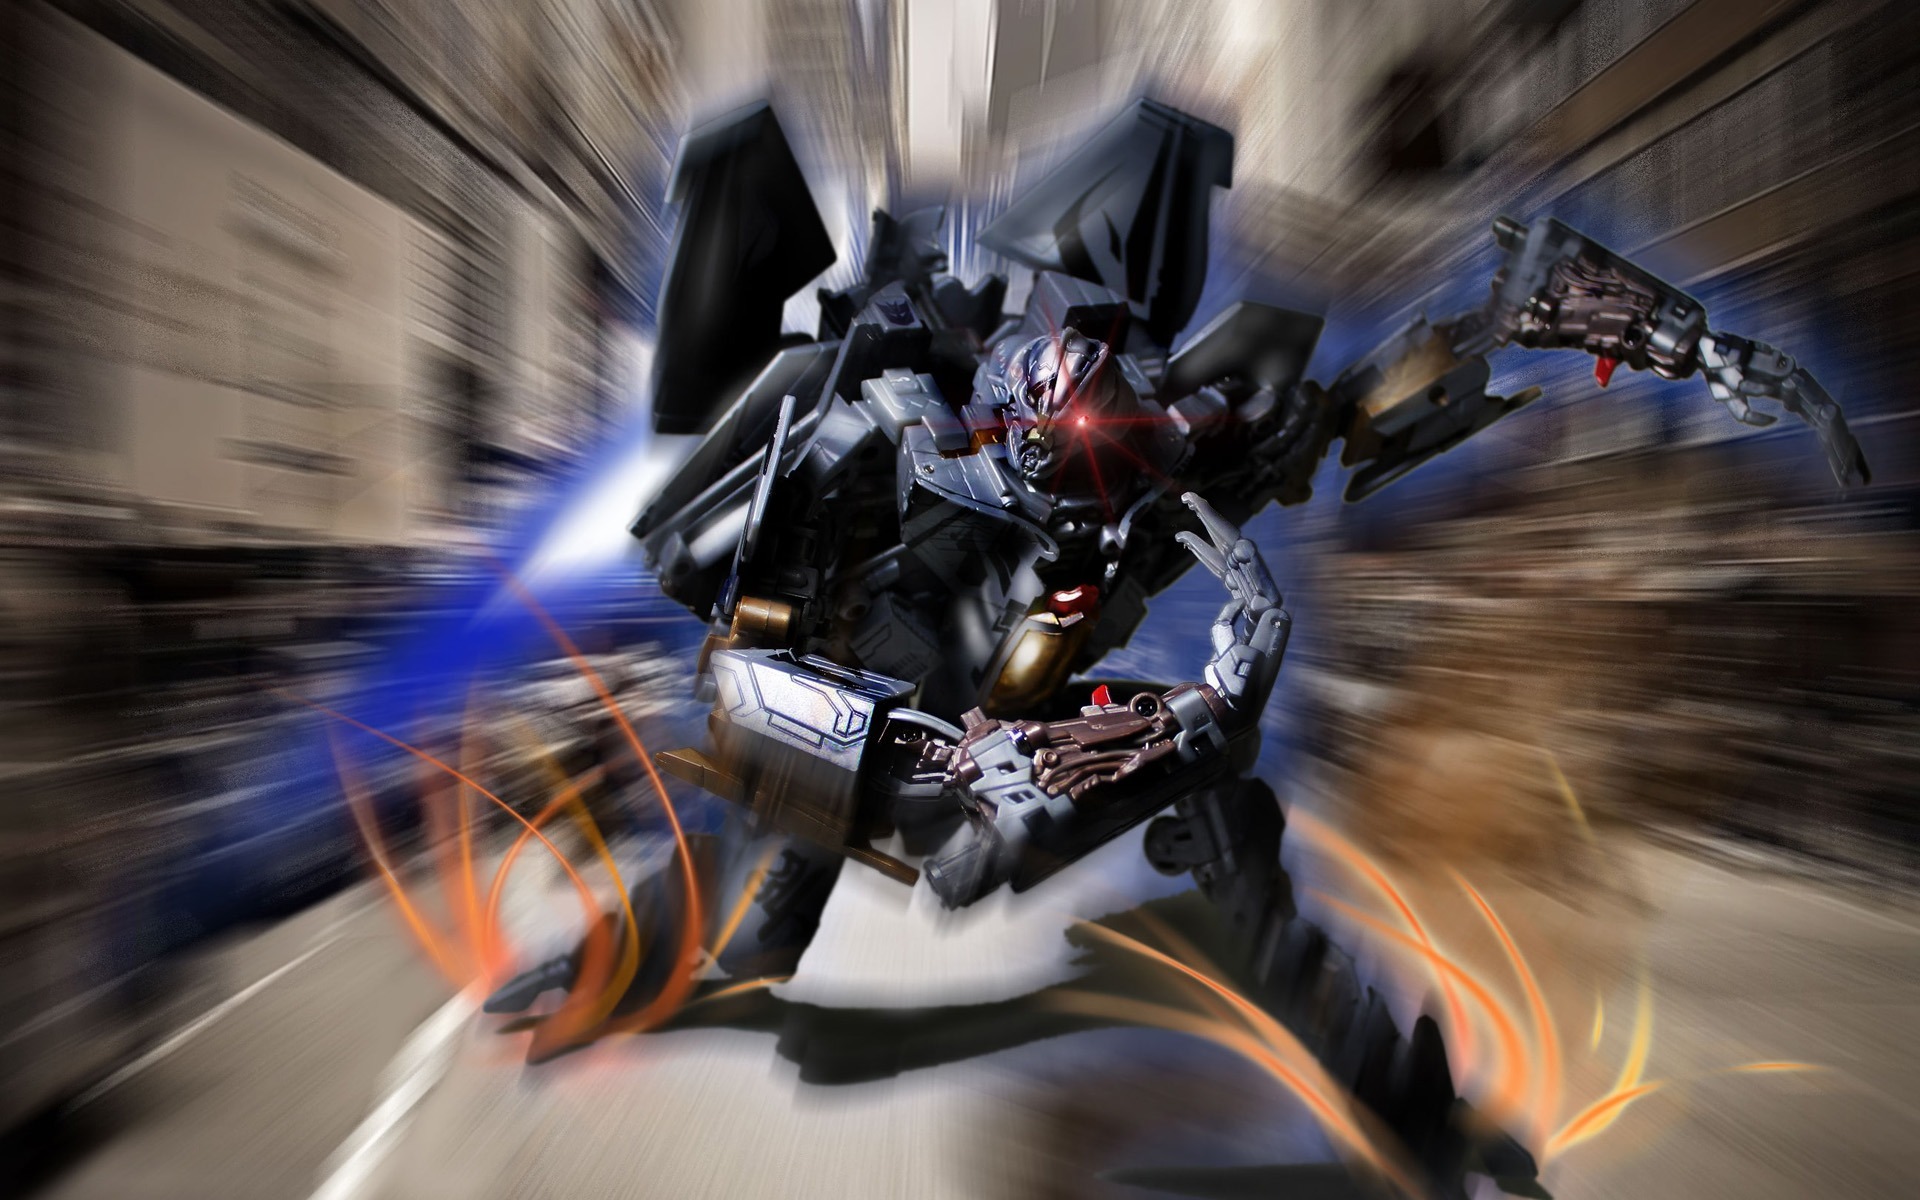 Transformers The Dark Of The Moon Transformers 3 HD Wallpapers 5